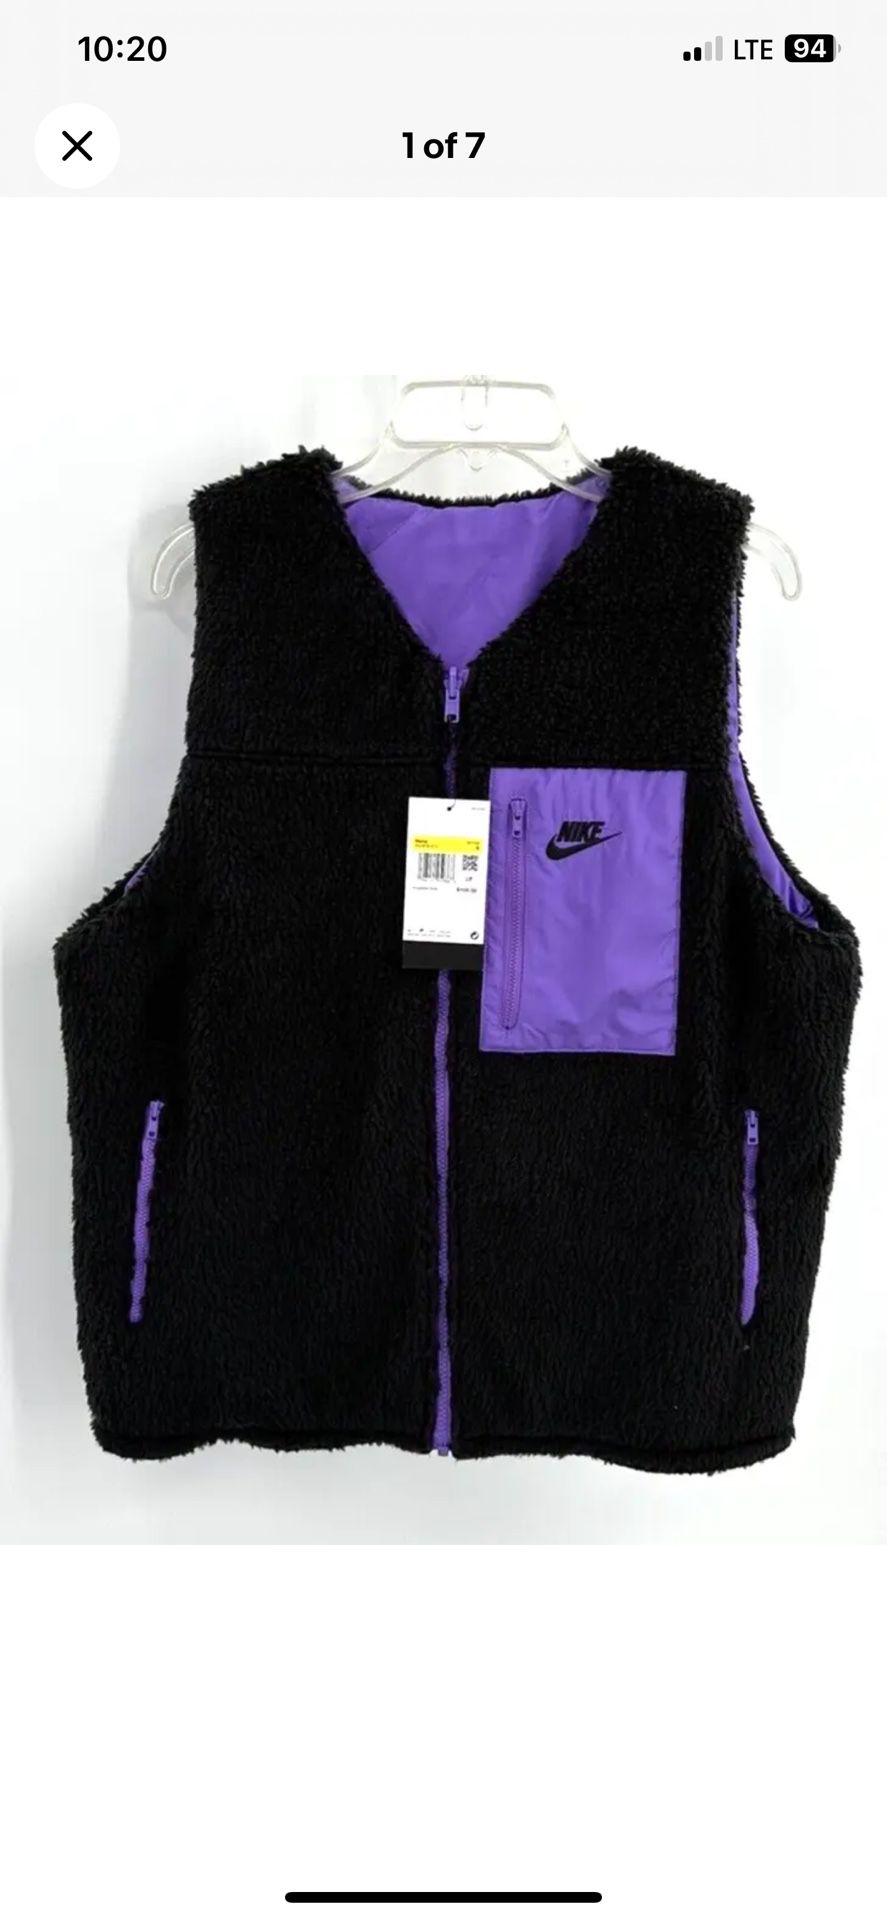 Men’s Nike Reversible Vest-Black/Purple-Size XL-Loose Fit-Insulated-New W/Tags!